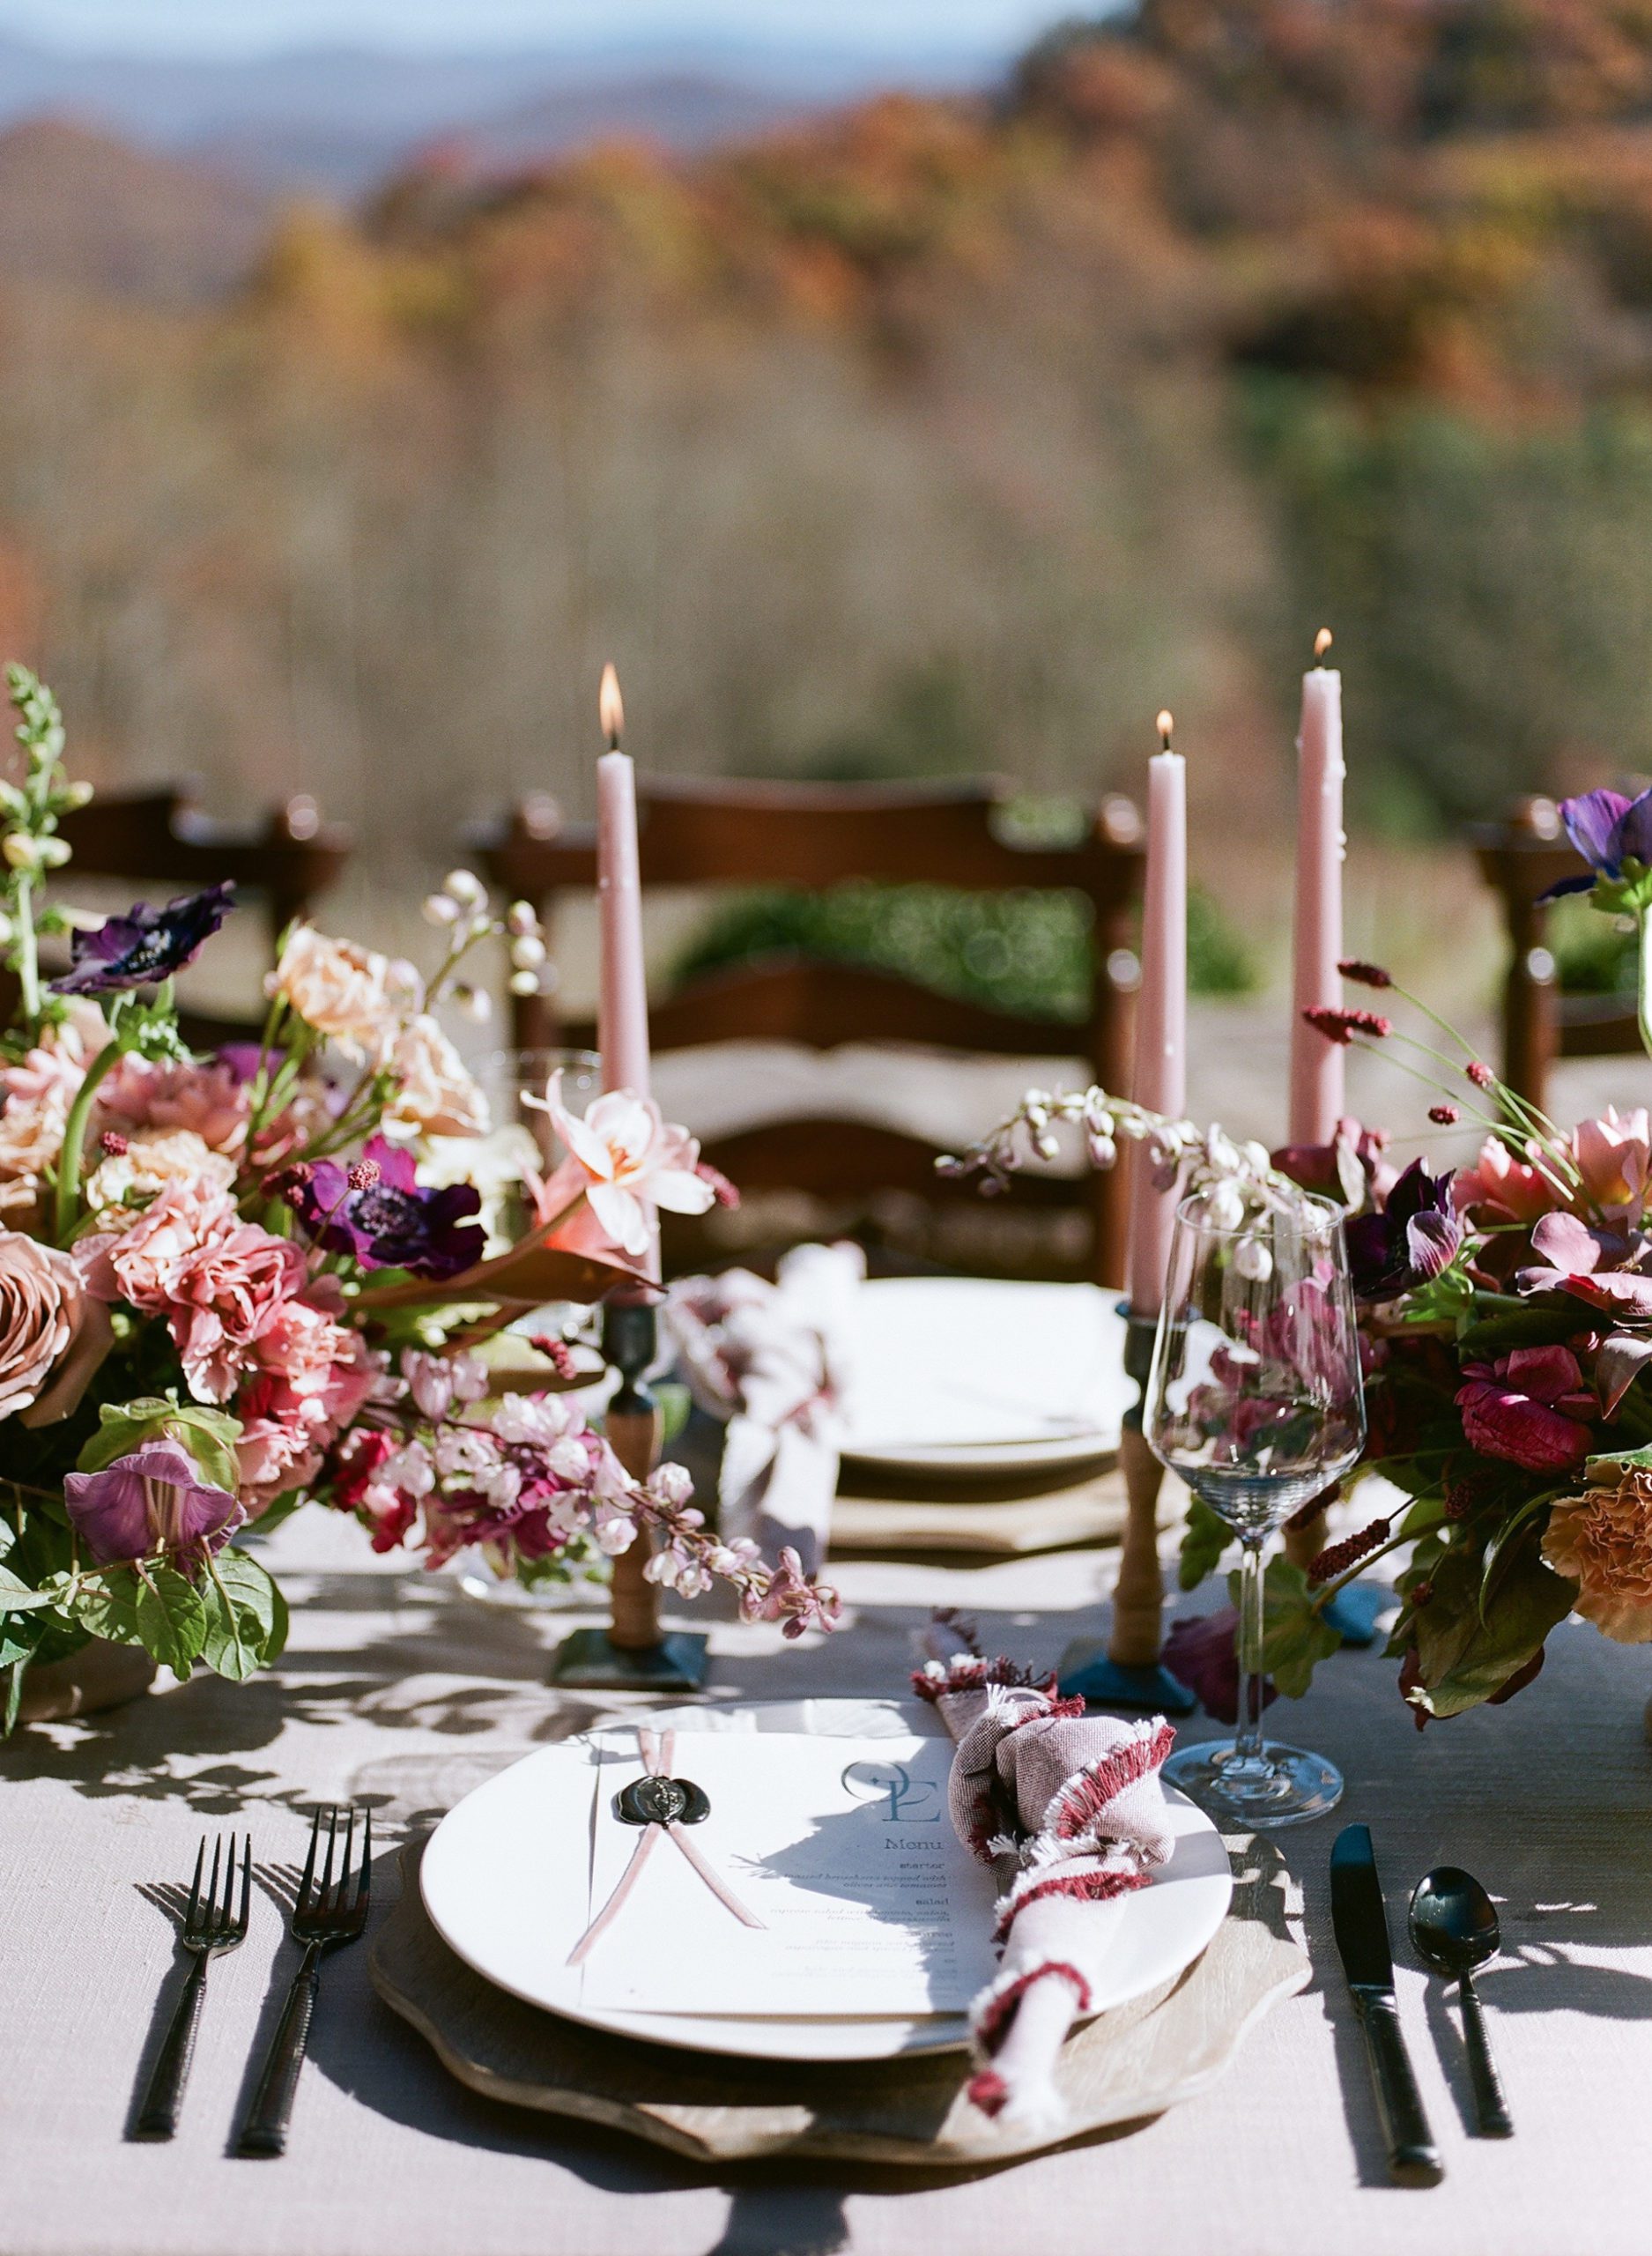 Wedding Reception Table with flowers and pillar candles photo